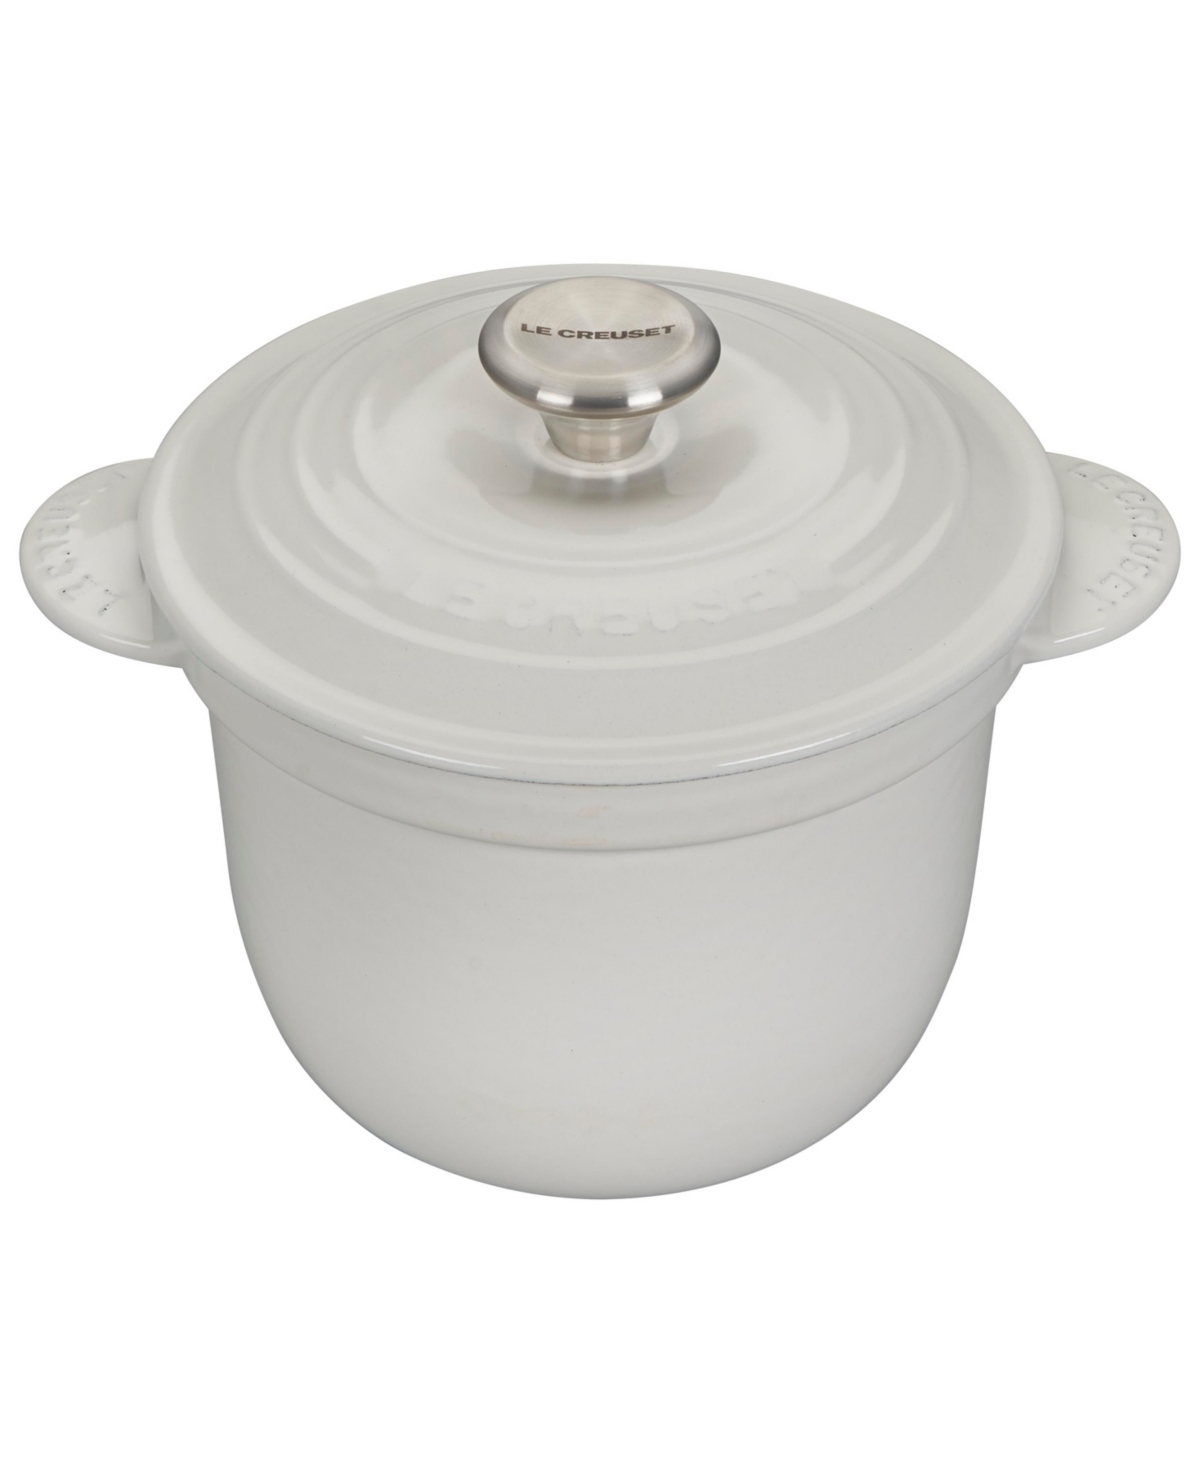 Le Creuset 2.25 Quart Enameled Cast Iron Rice Pot With Lid In White